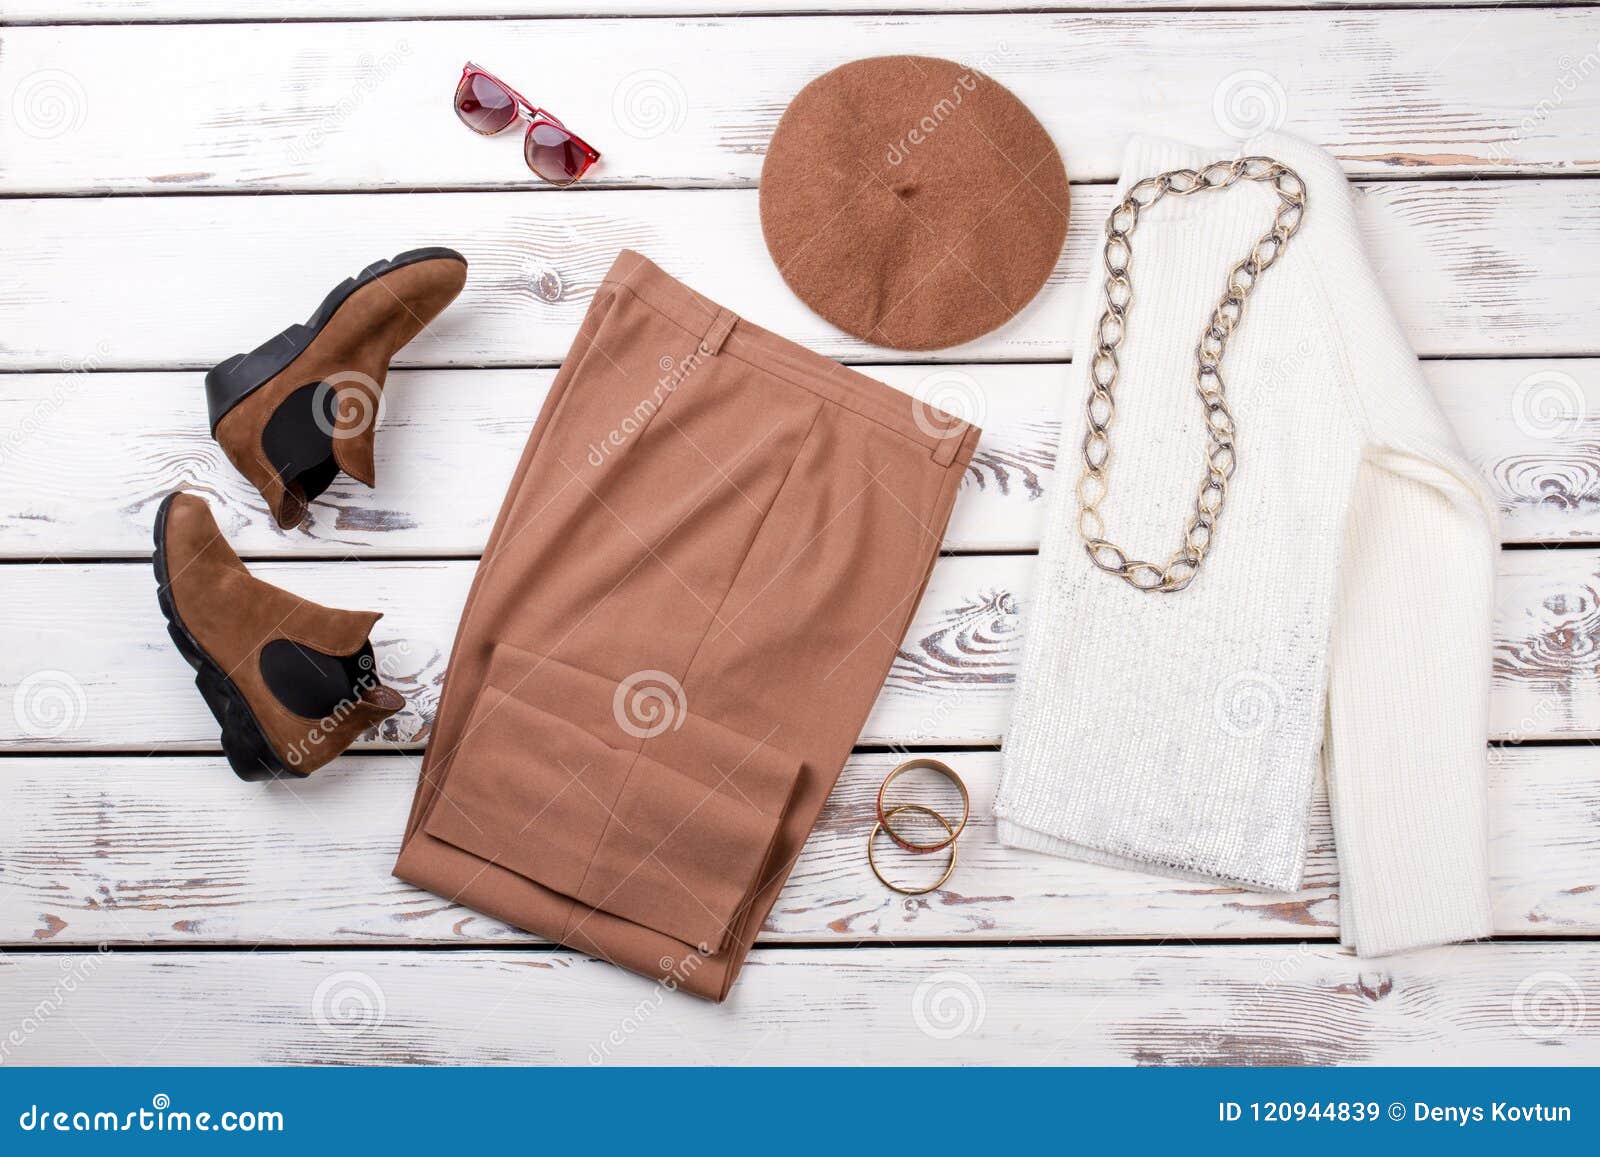 Fashionable Women`s Clothes on the Table. Stock Image - Image of layout ...